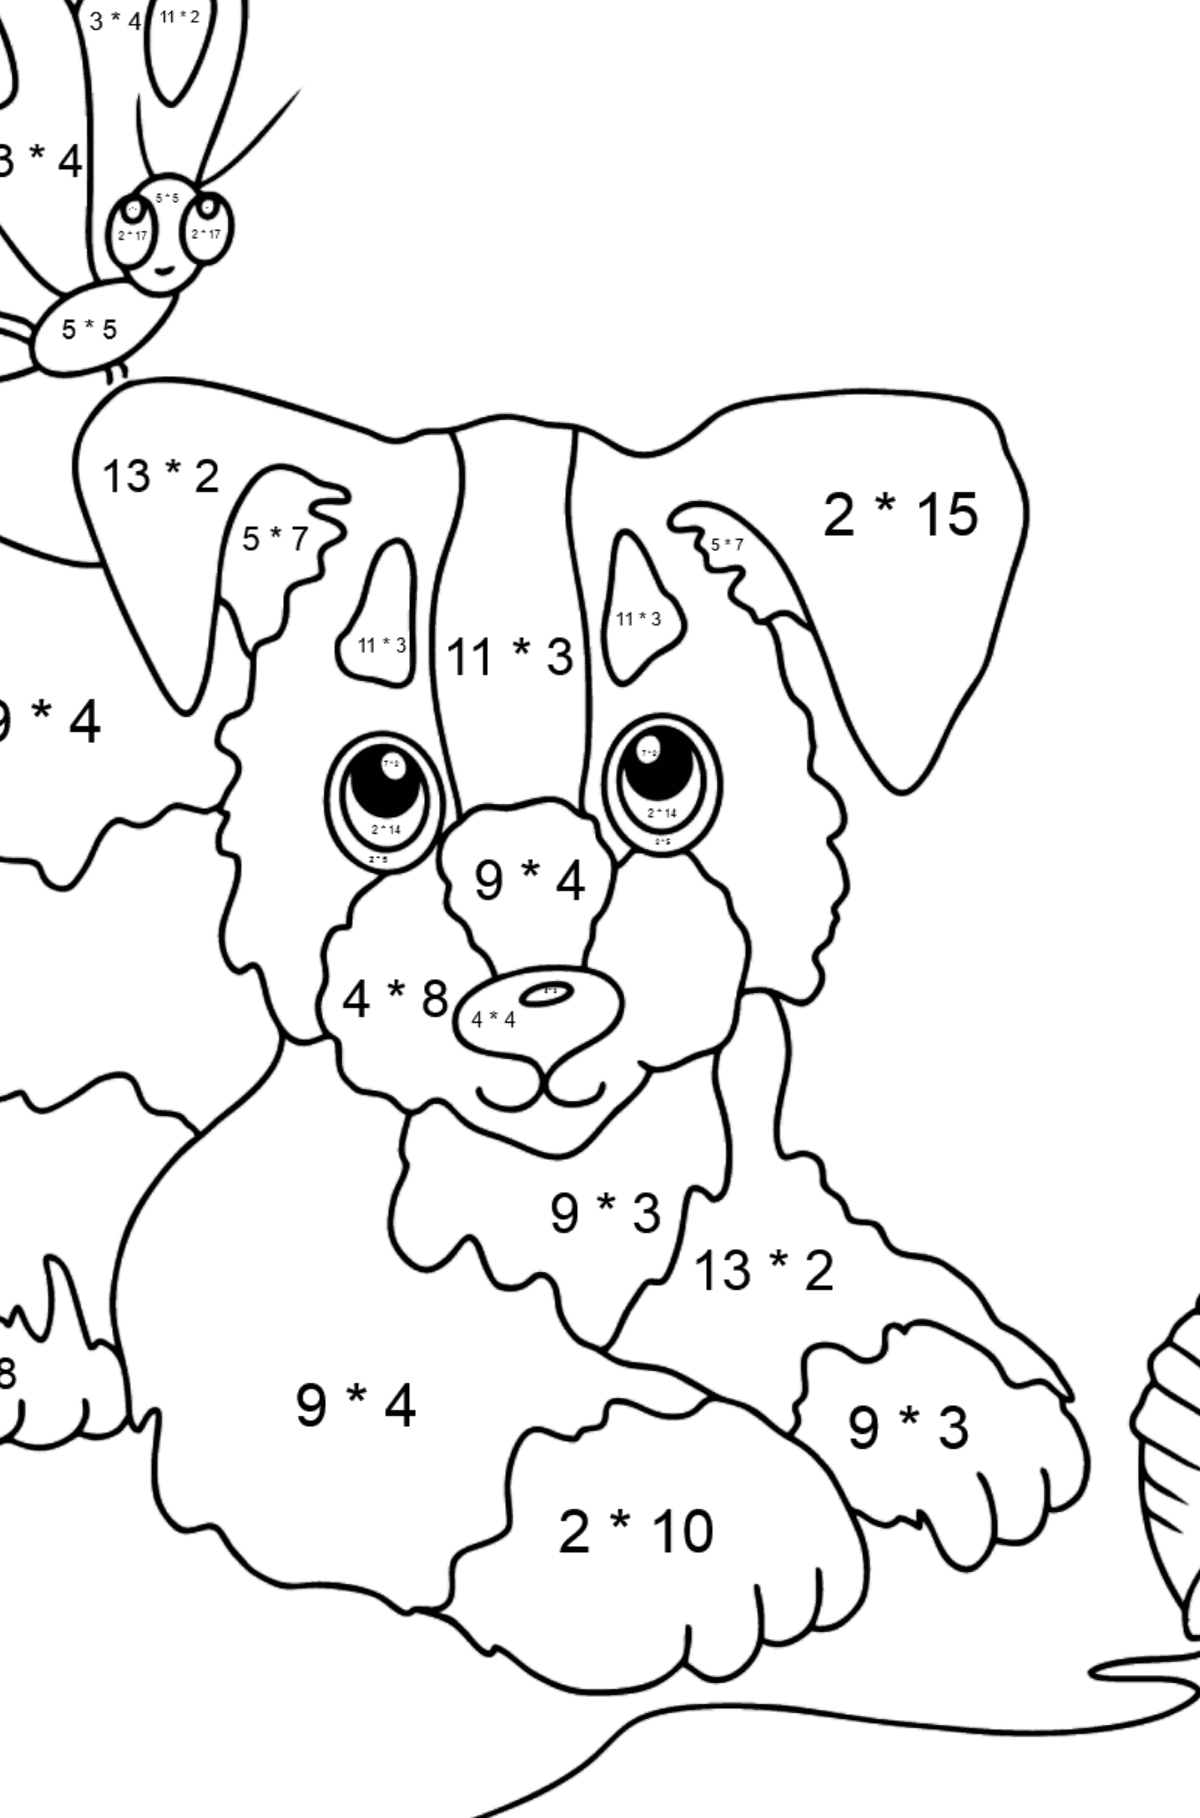 Coloring Page - A Dog is Playing with a Ball of Yarn and Butterflies - Math Coloring - Multiplication for Kids